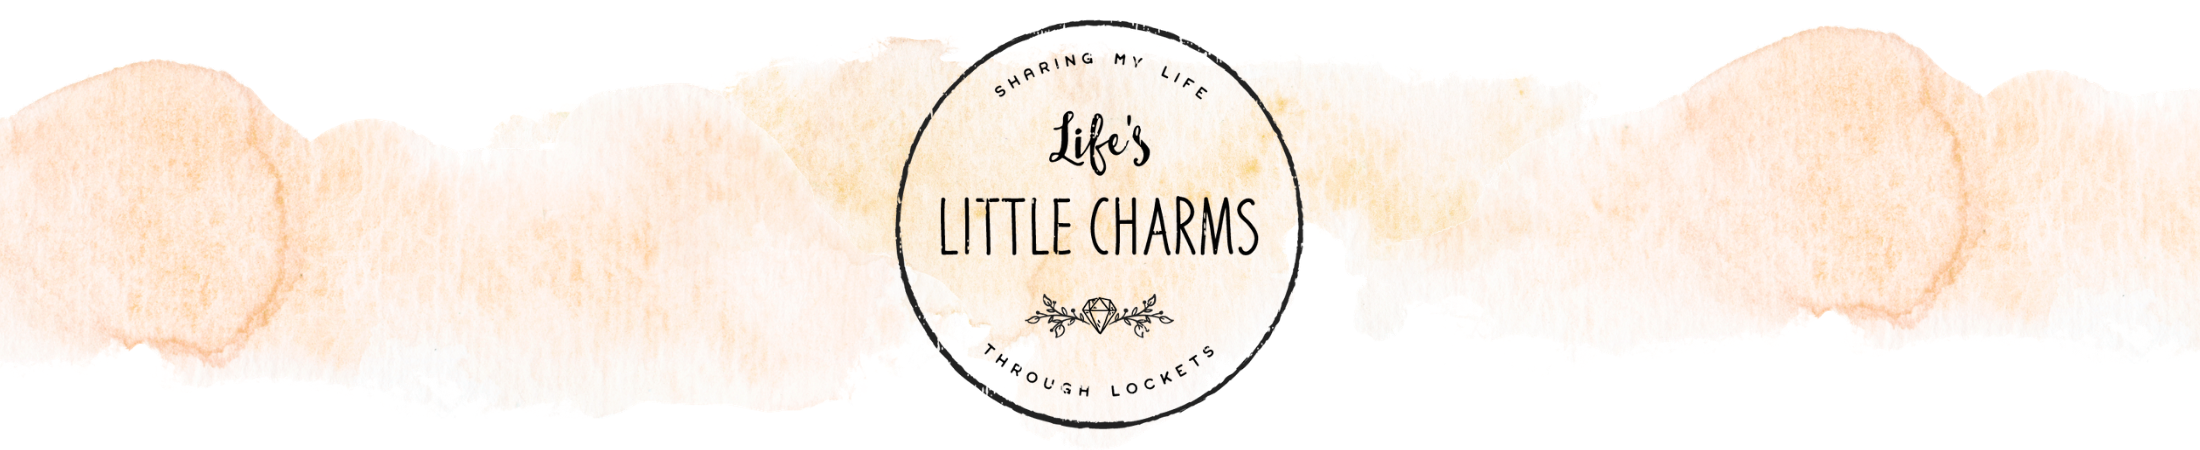 life's little charms